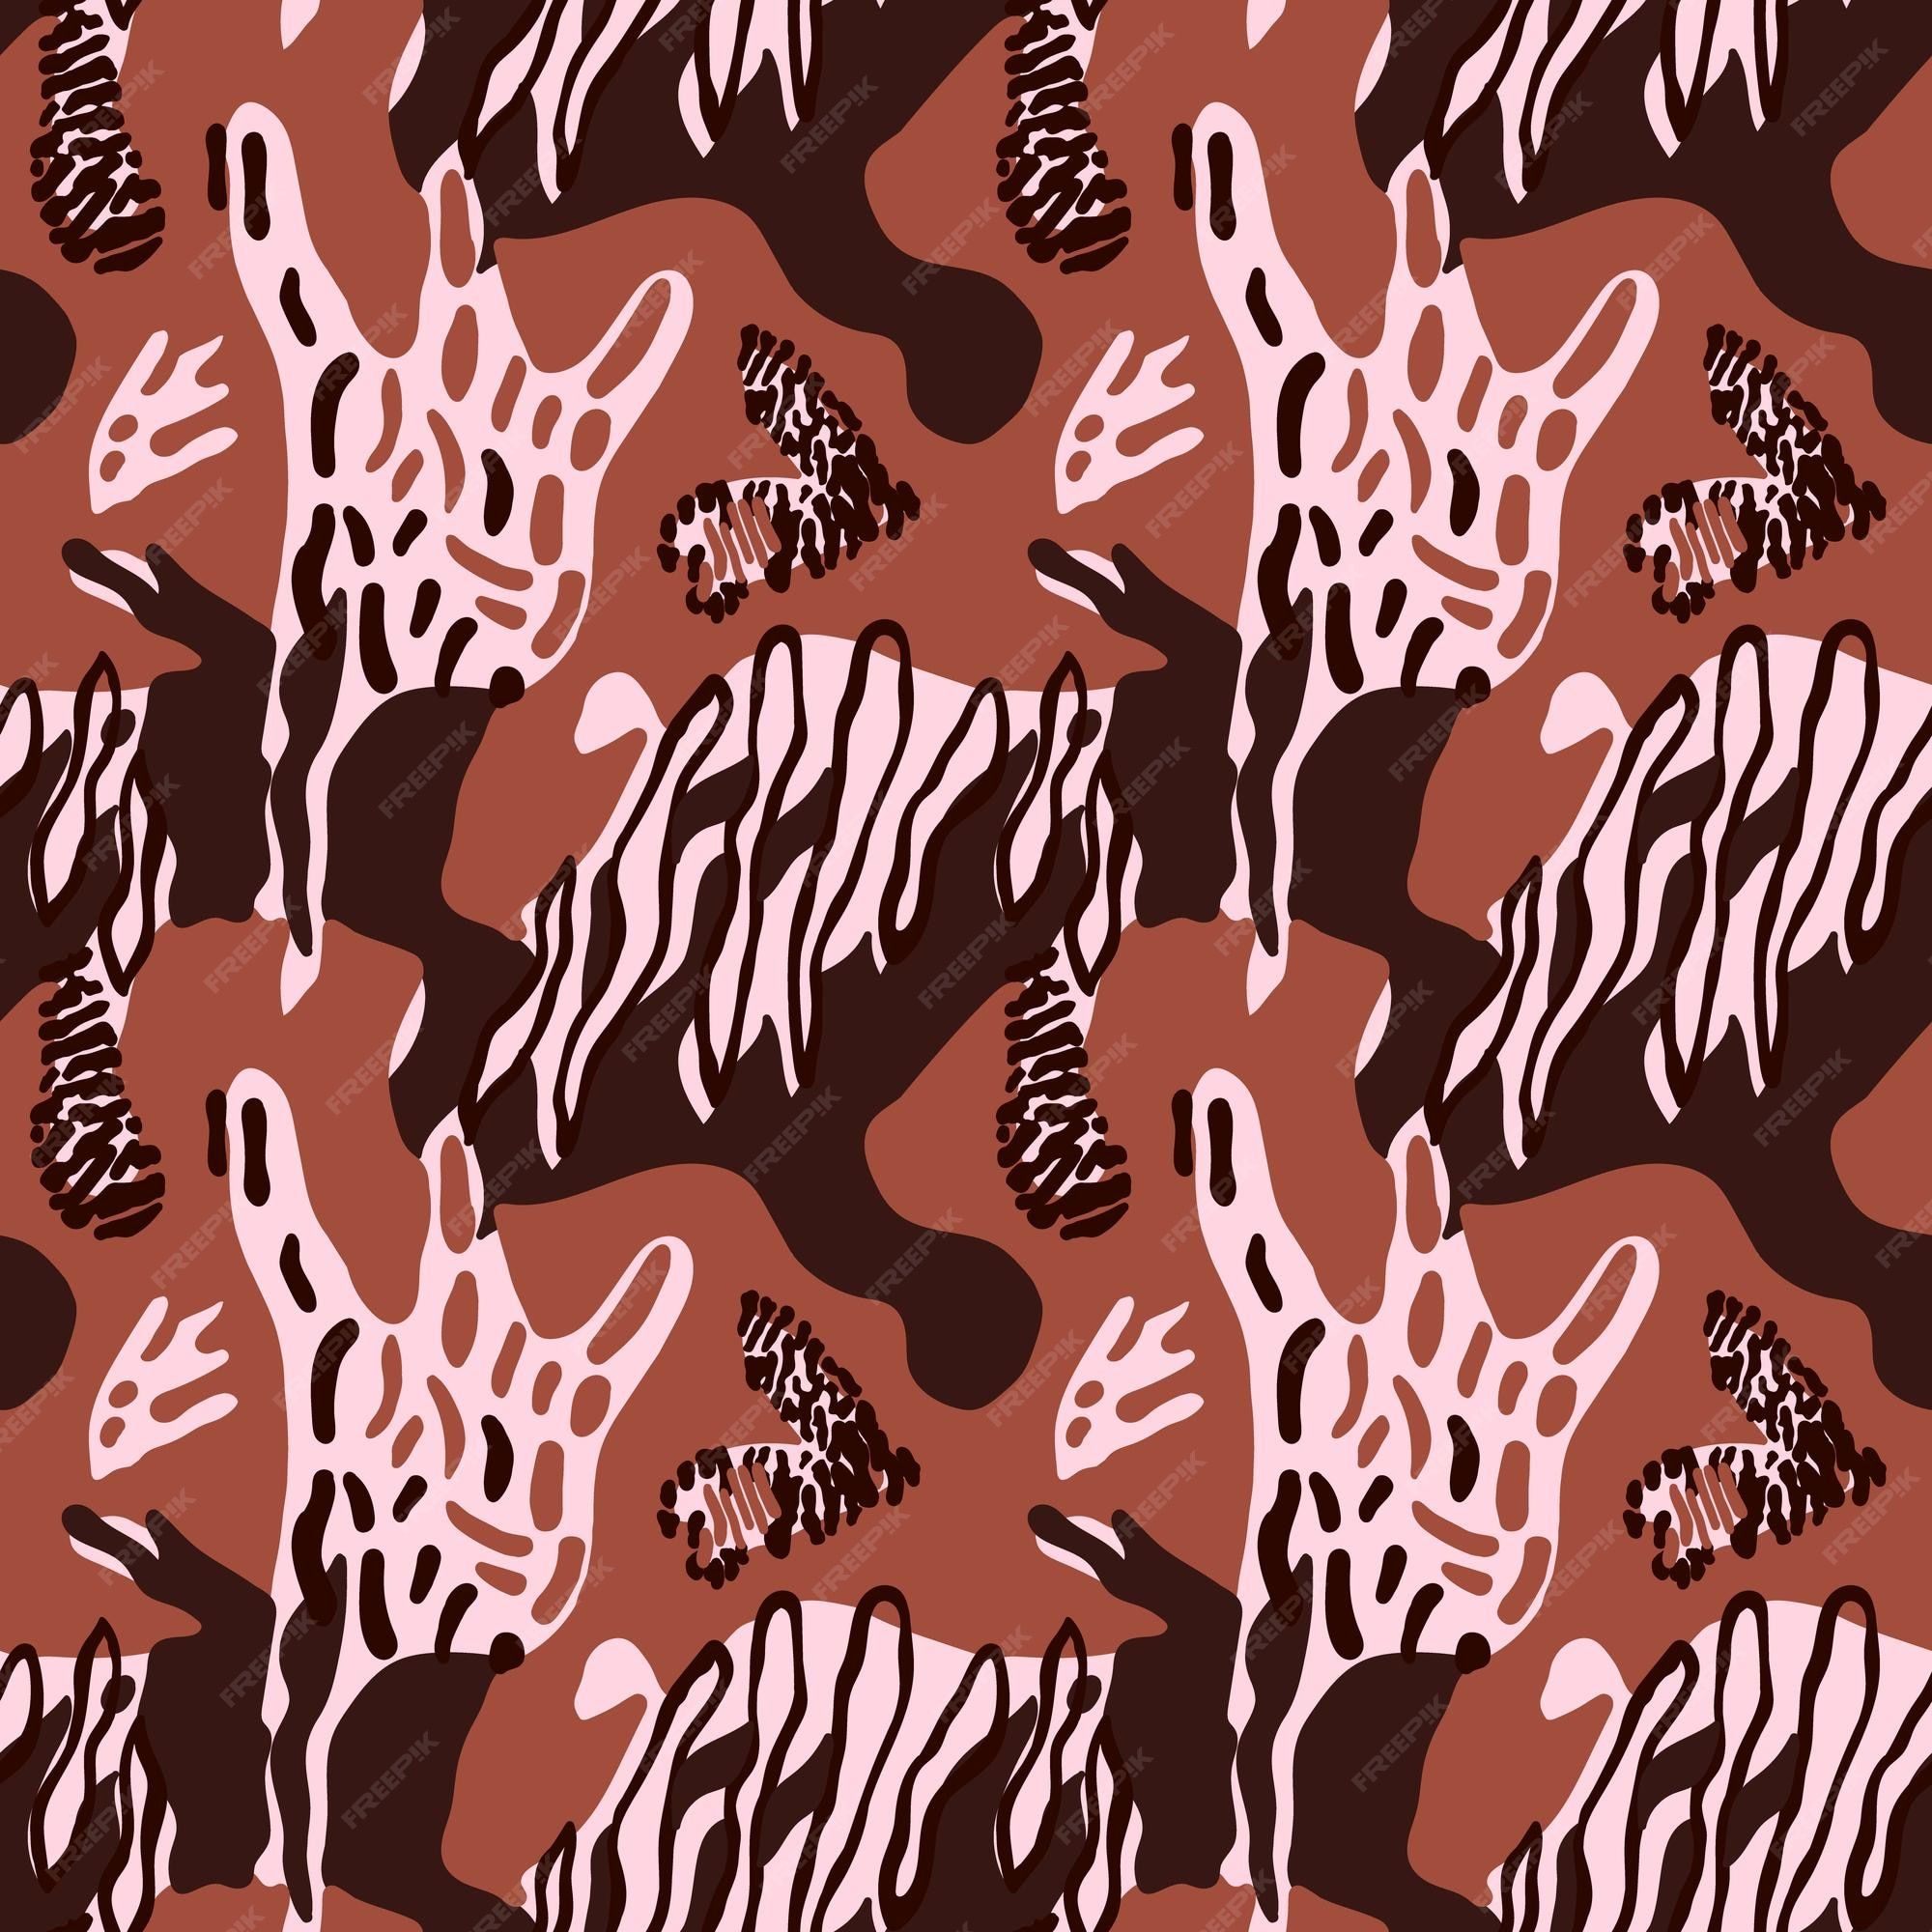 Seamless pattern with giraffe, zebra and cheetah prints. Hand drawn animal camouflage. Design for fashion, textile, fabric, wrapping paper, wallpaper, home decor. Vector illustration - Leopard